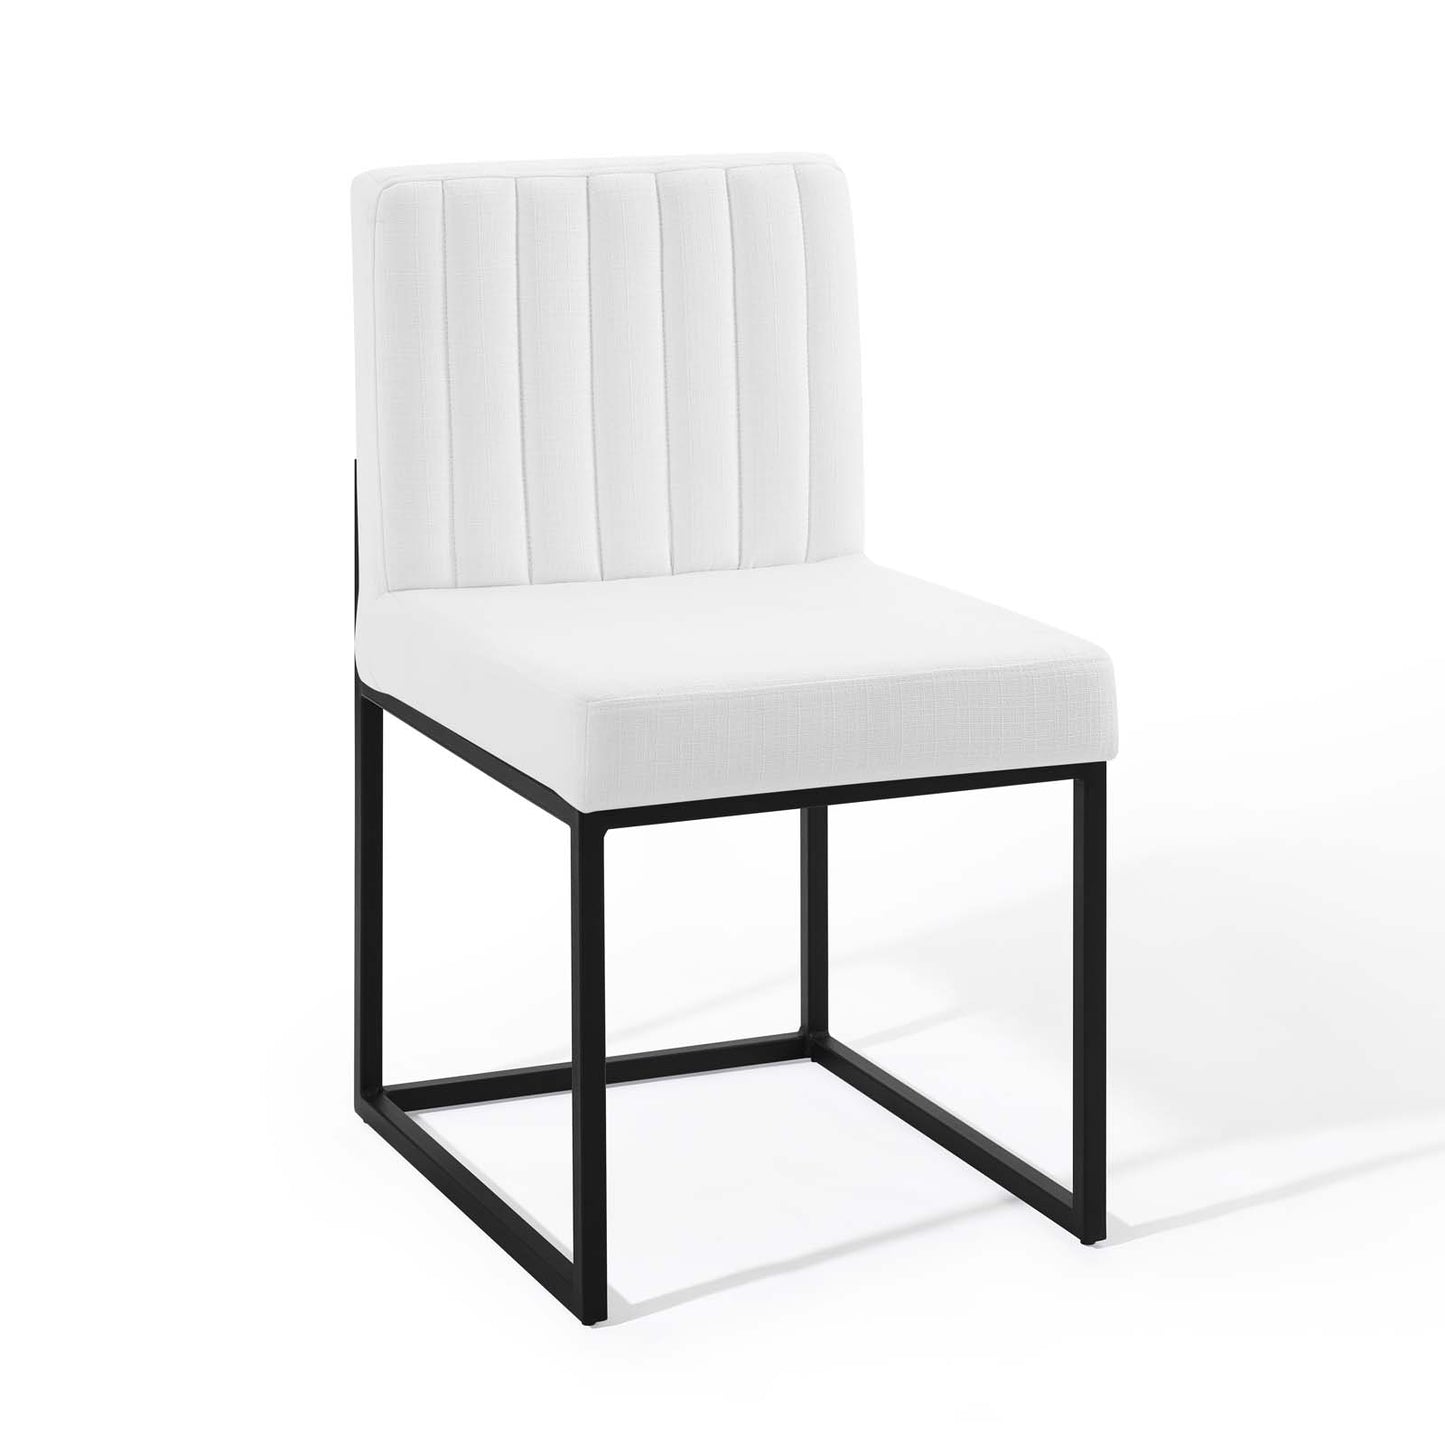 Carriage Channel Tufted Sled Base Upholstered Fabric Dining Chair Black White EEI-3807-BLK-WHI